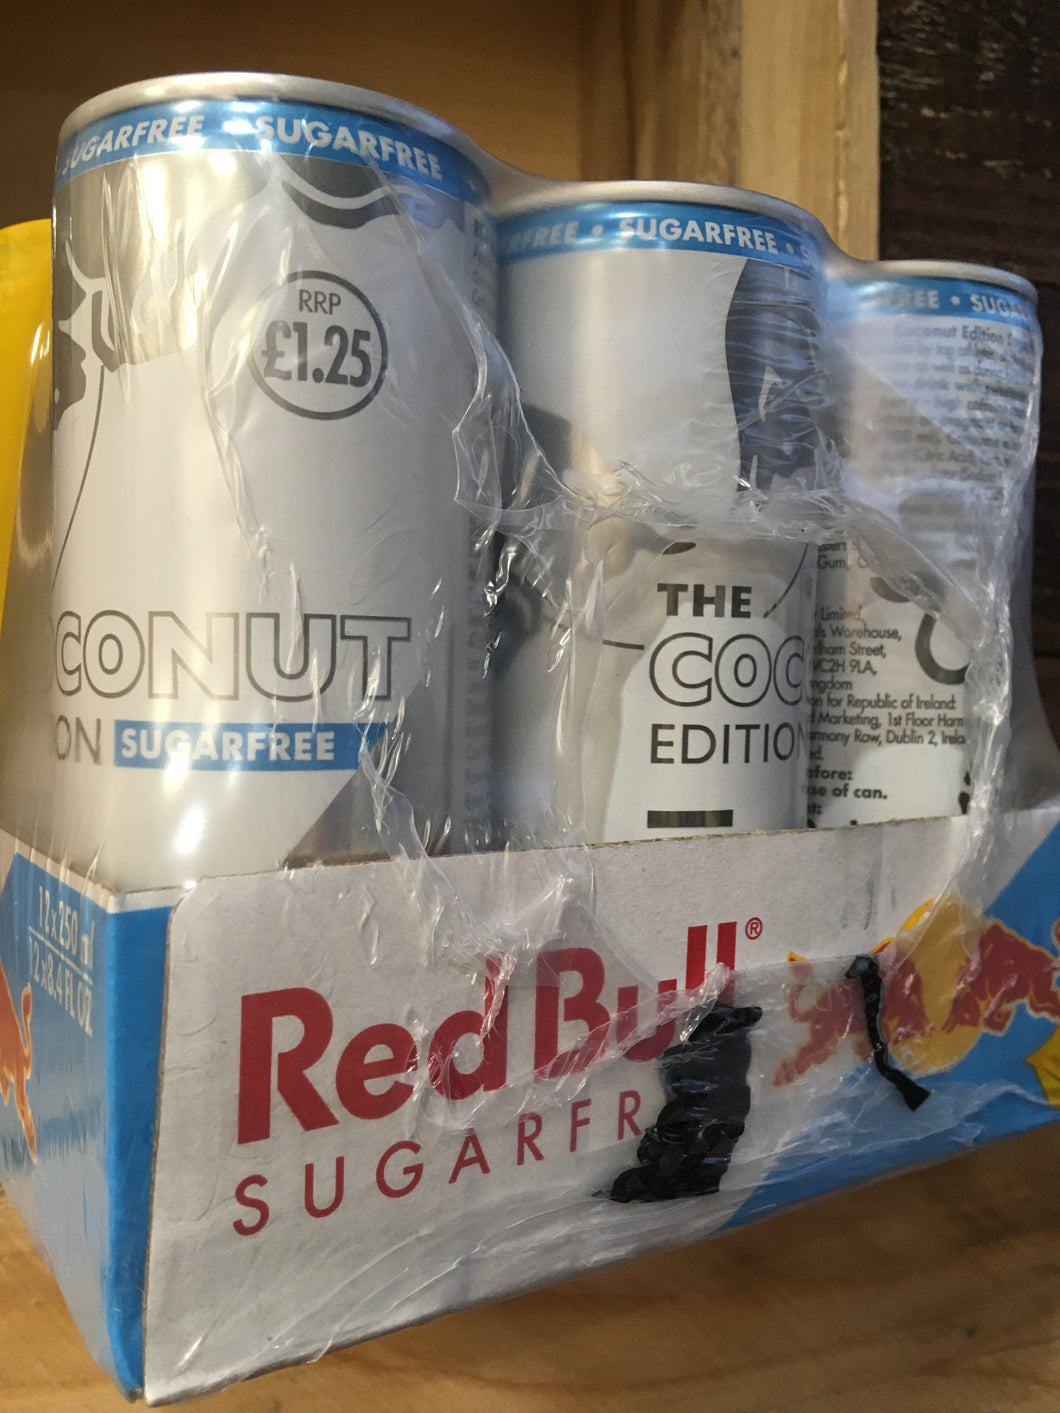 12x Red Bull Sugarfree The Coconut & Berry Edition (12x250ml)